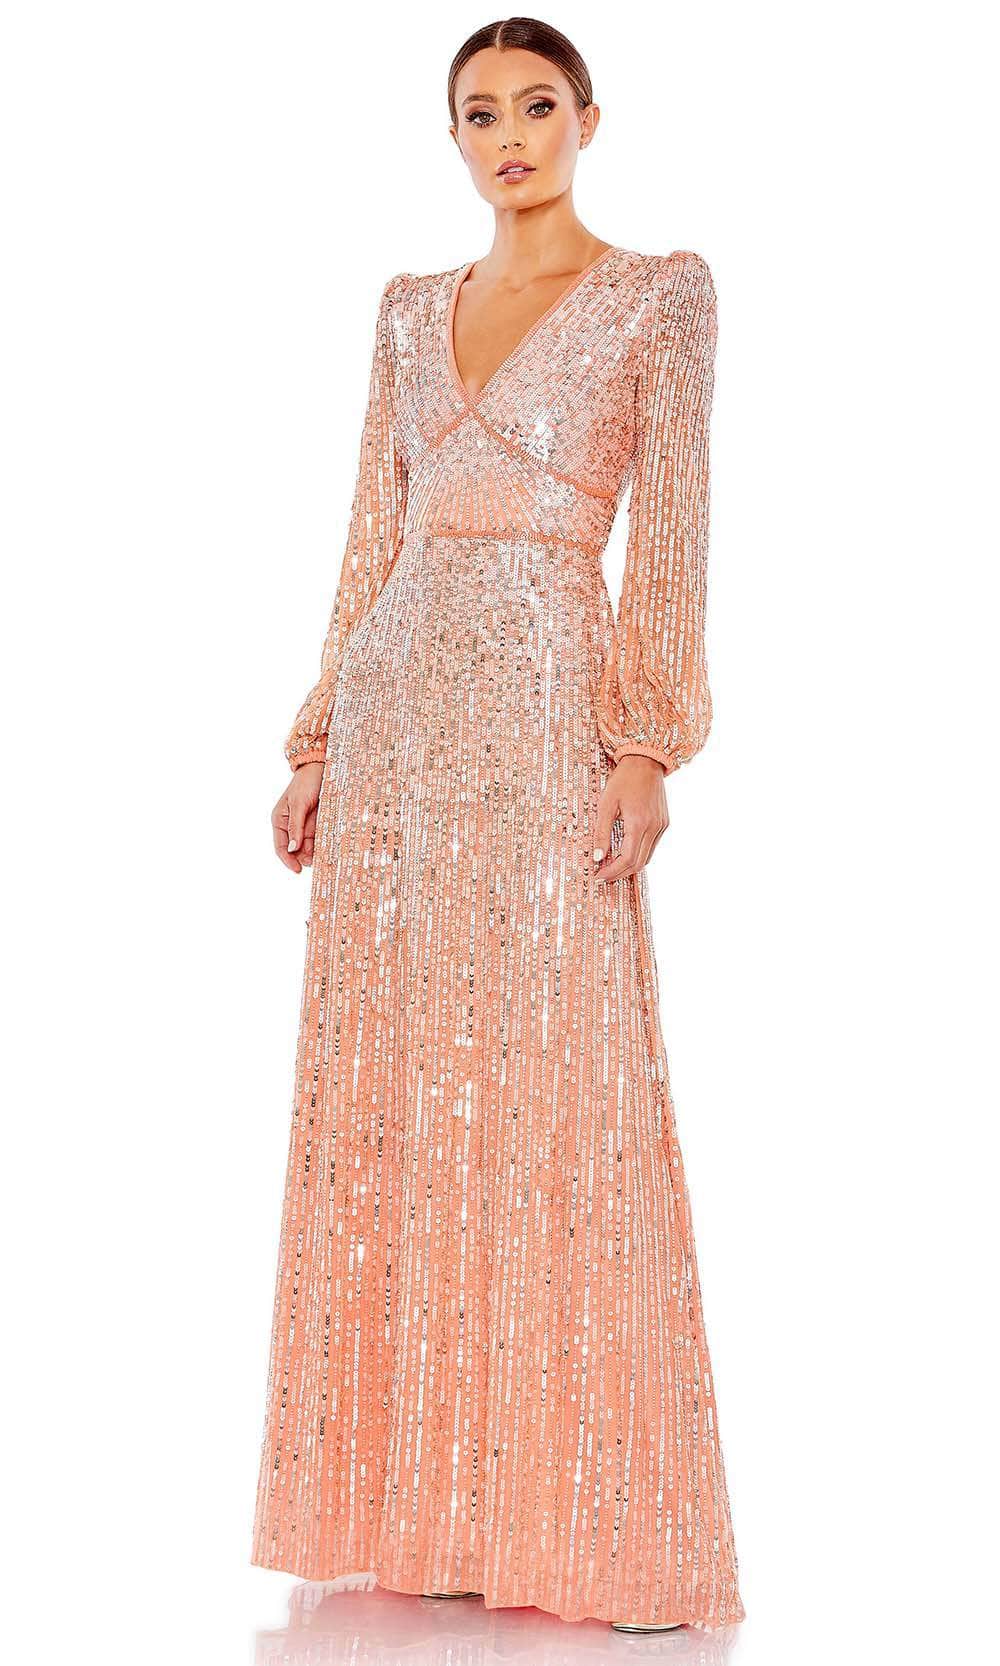 Image of Mac Duggal 5643 - Puff Sleeved Sequin Evening Gown